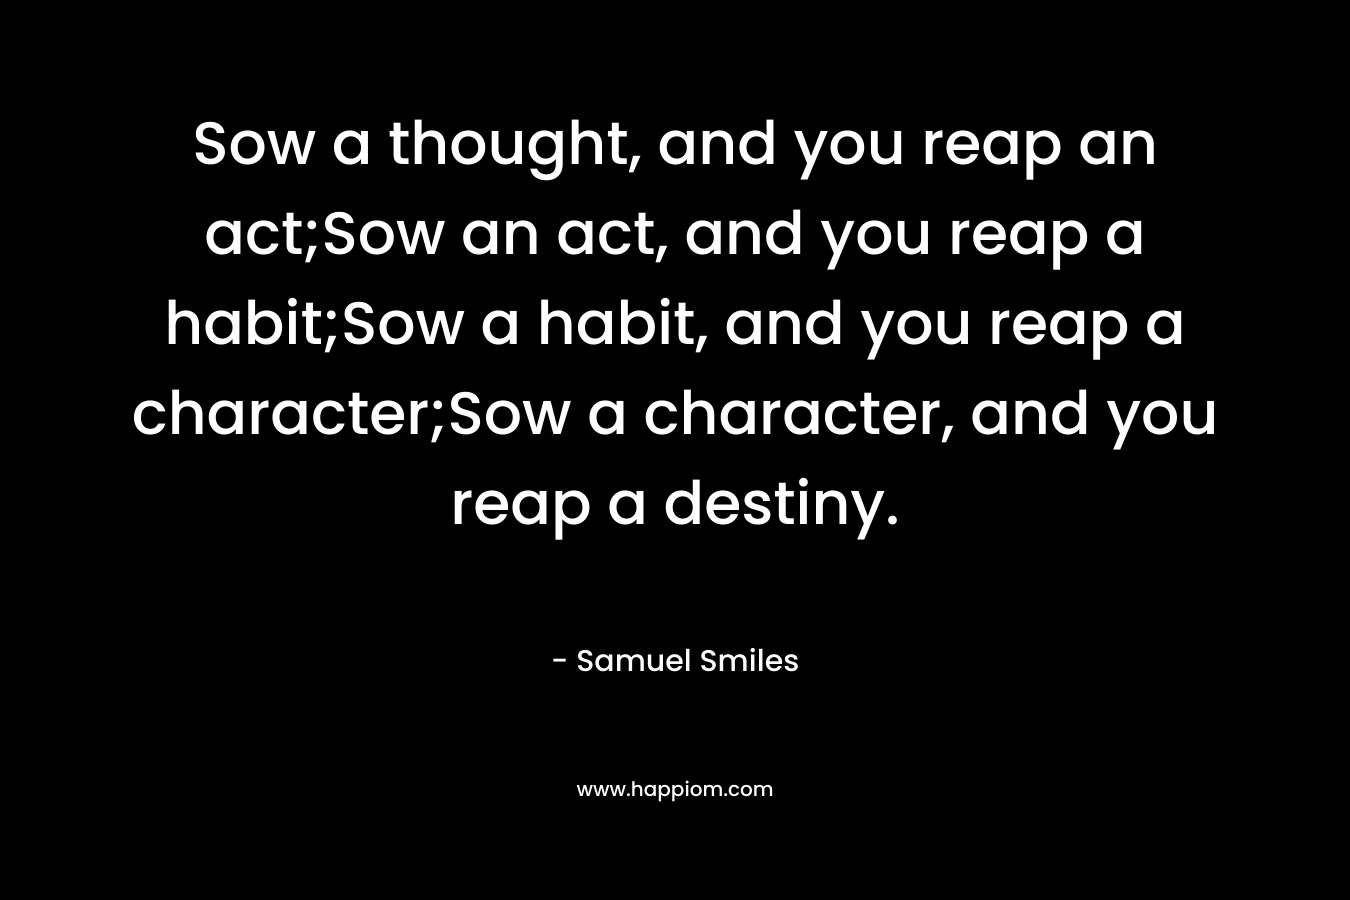 Sow a thought, and you reap an act;Sow an act, and you reap a habit;Sow a habit, and you reap a character;Sow a character, and you reap a destiny.